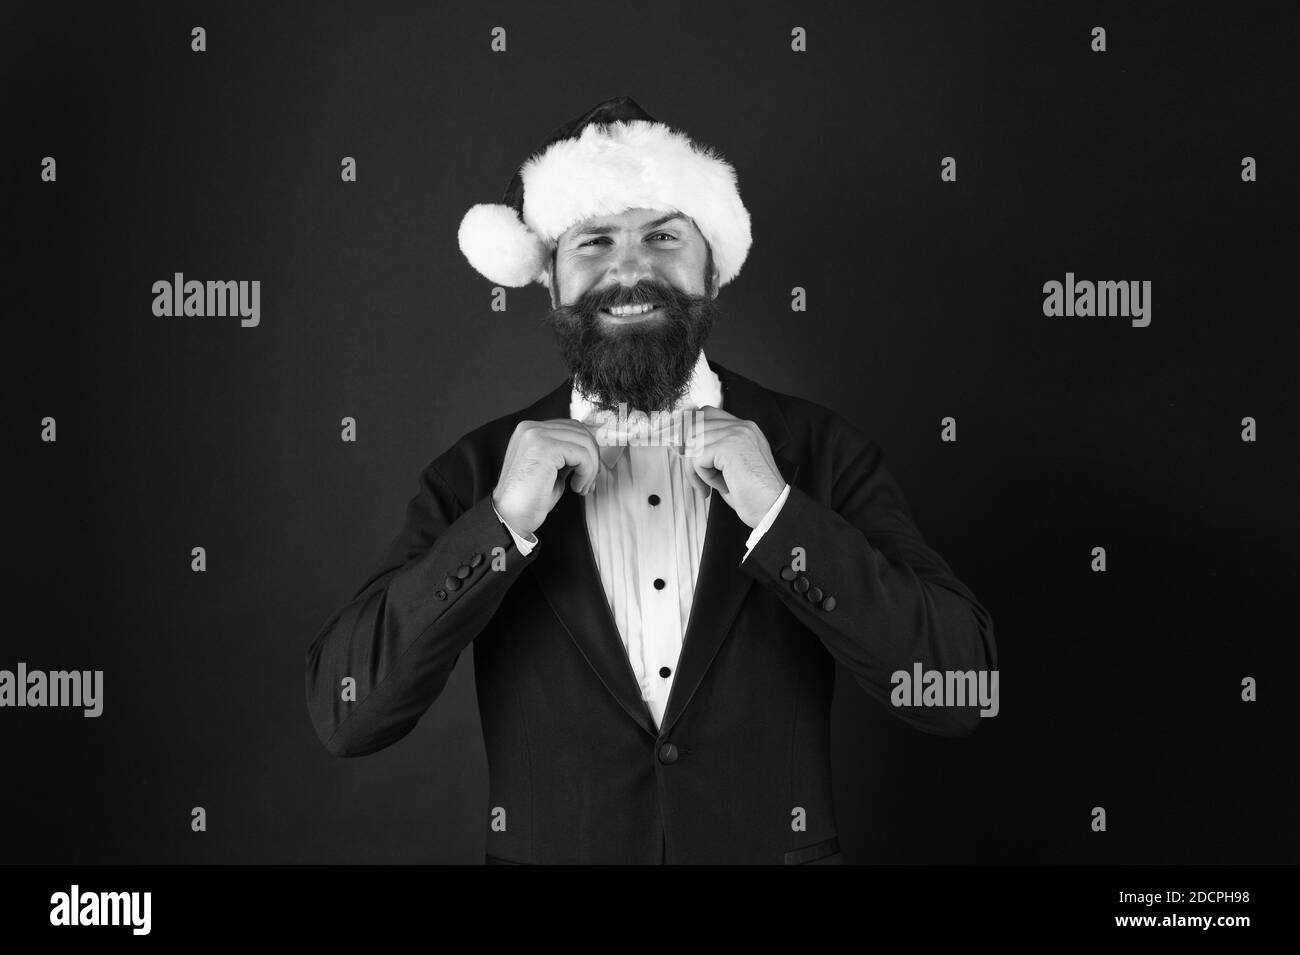 Costumes attractive Black and White Stock Photos & Images - Alamy